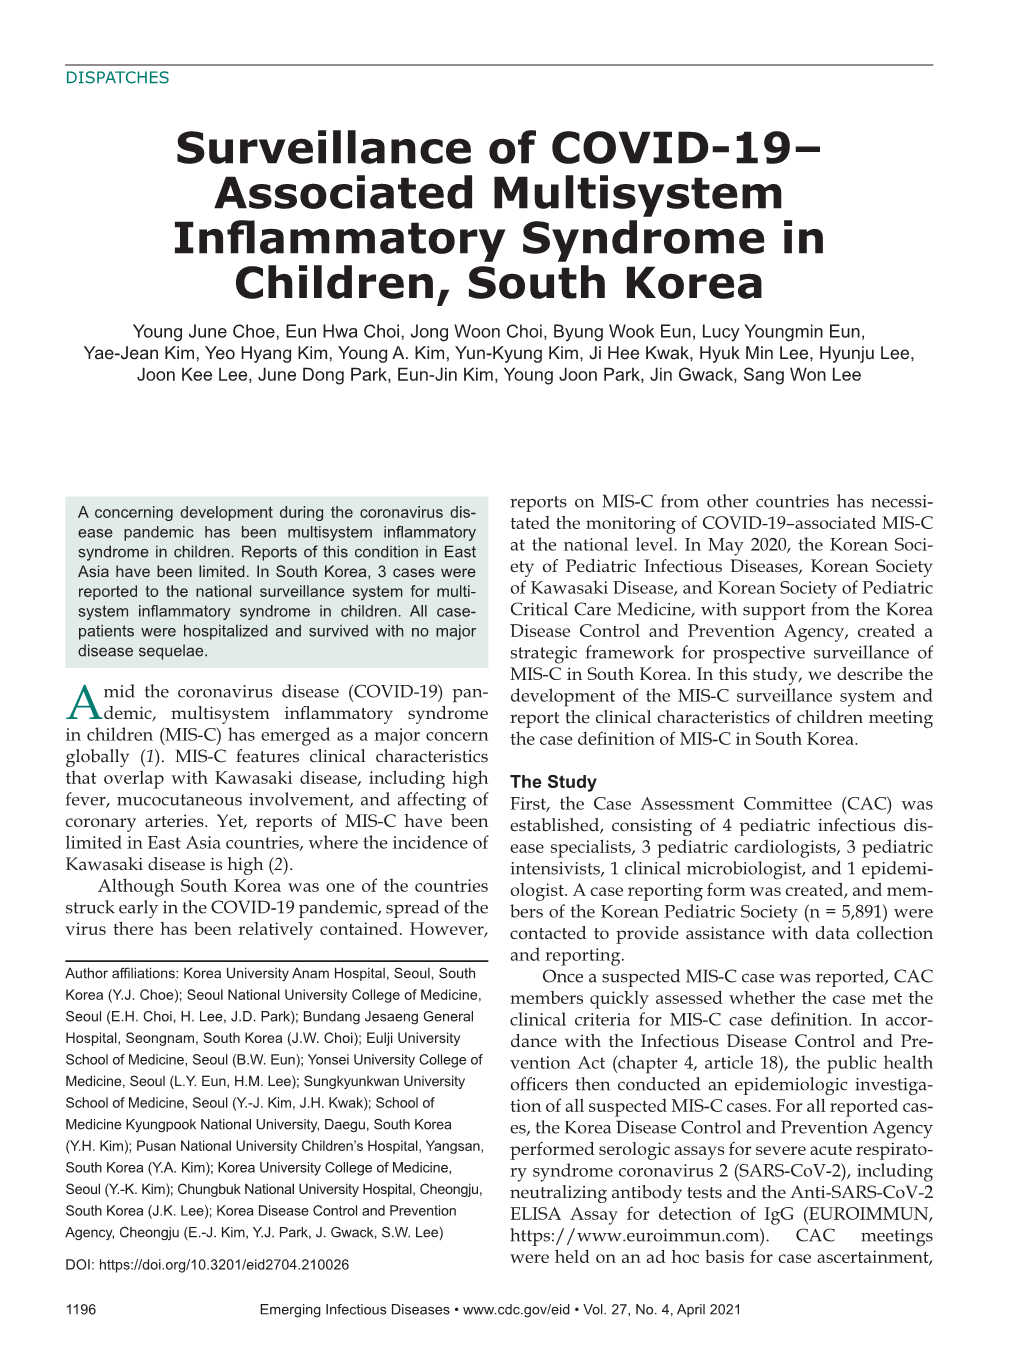 Surveillance of COVID-19– Associated Multisystem Inflammatory Syndrome in Children, South Korea